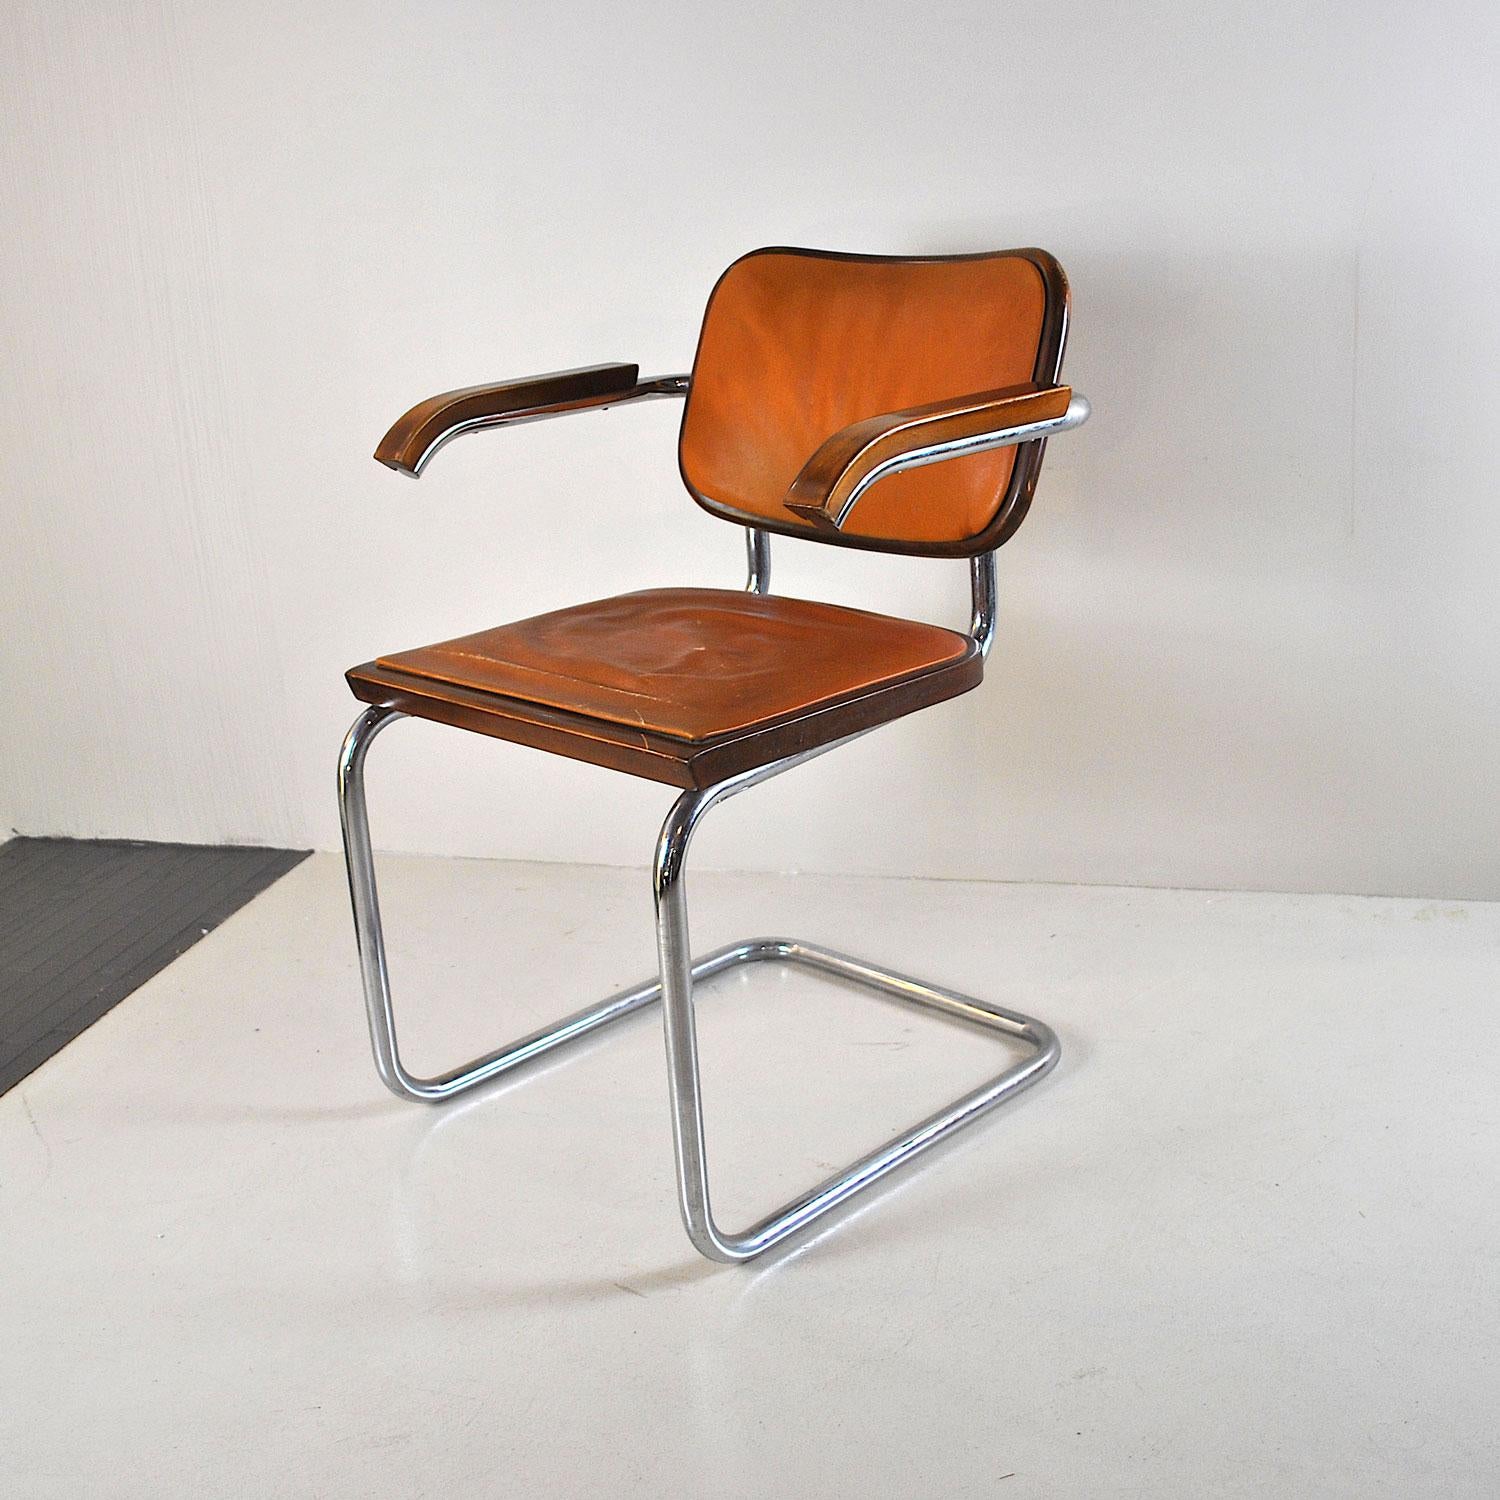 Mid-20th Century In a Style Marcel Breuer Chair Model Cesca For Sale